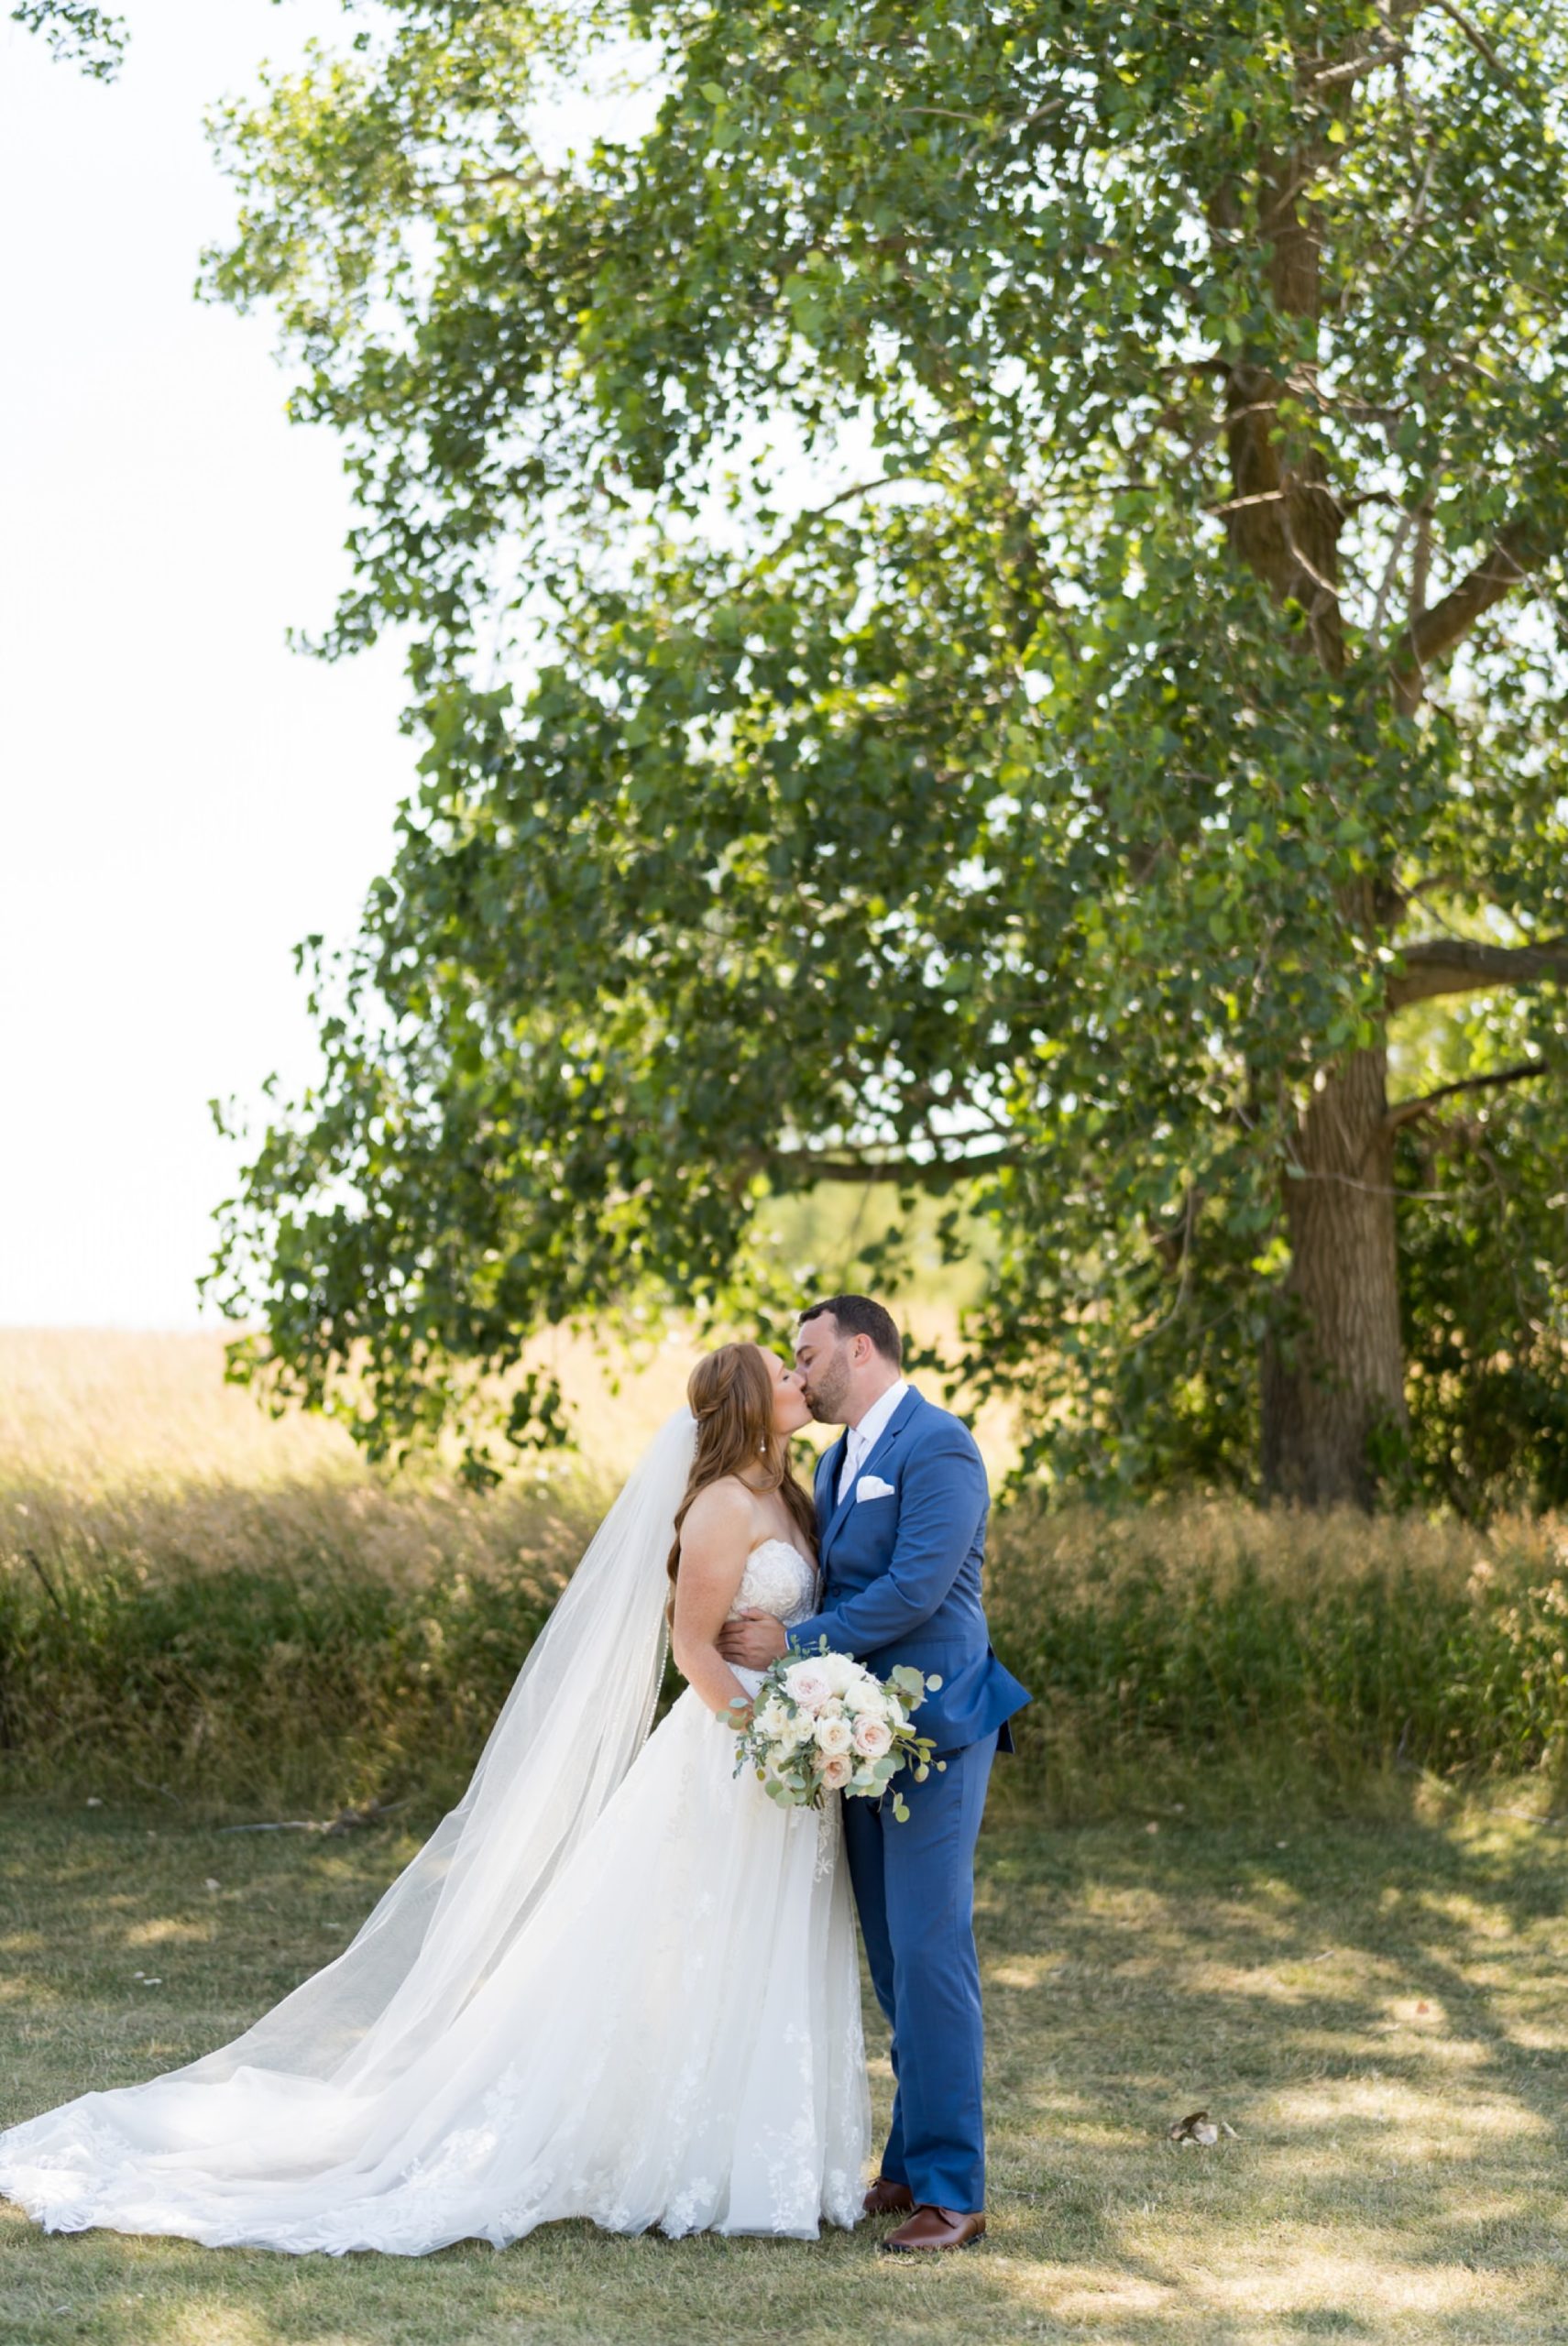 Sarah and Justin kiss near a field of grass and a tree on their wedding day. 